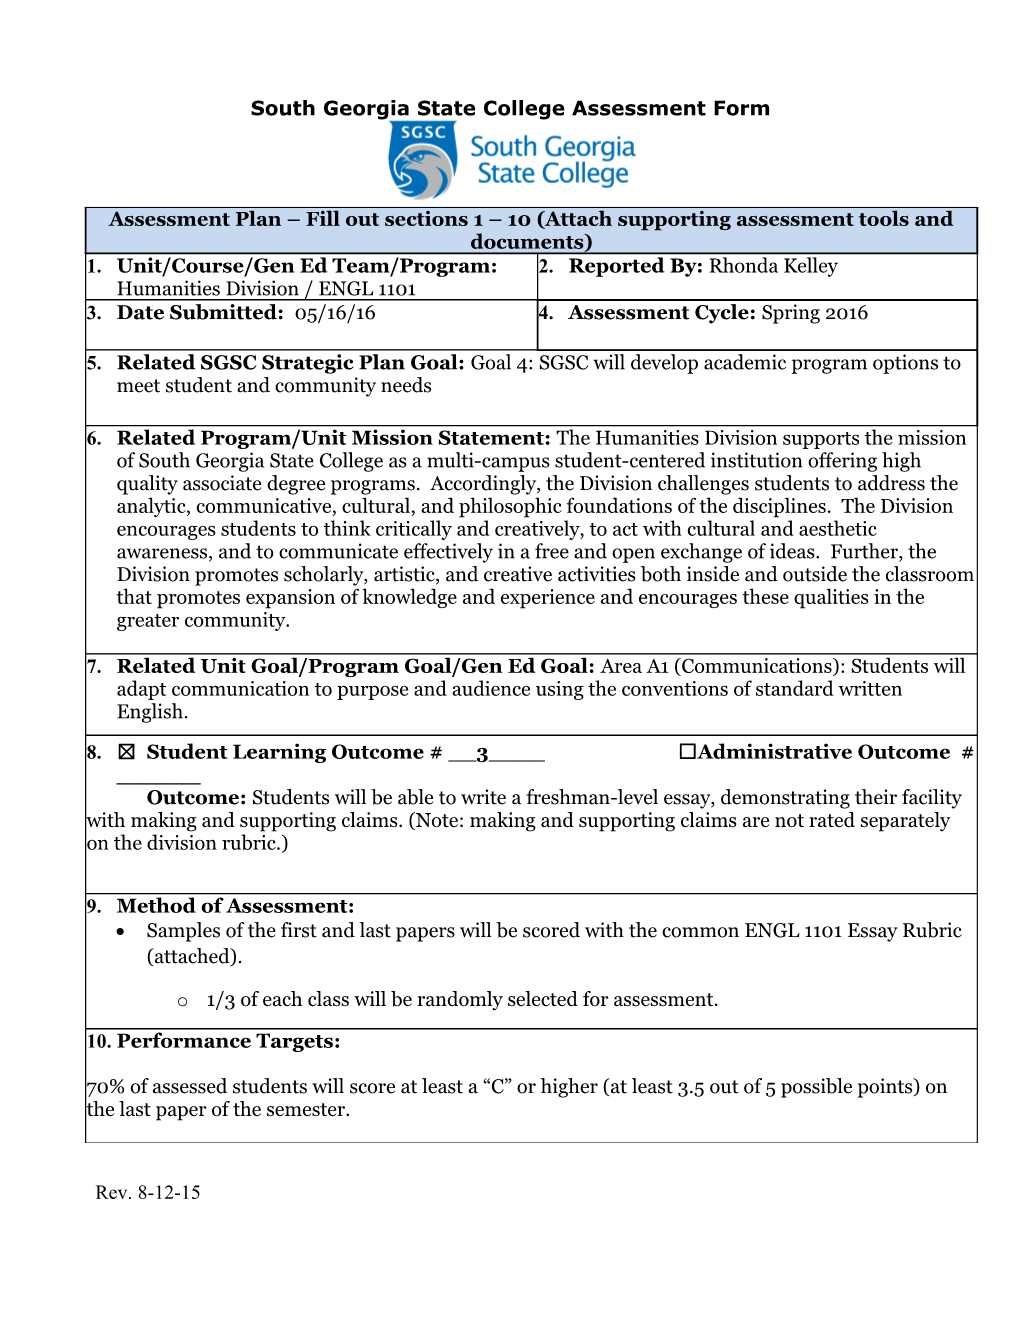 South Georgia State College Assessment Form